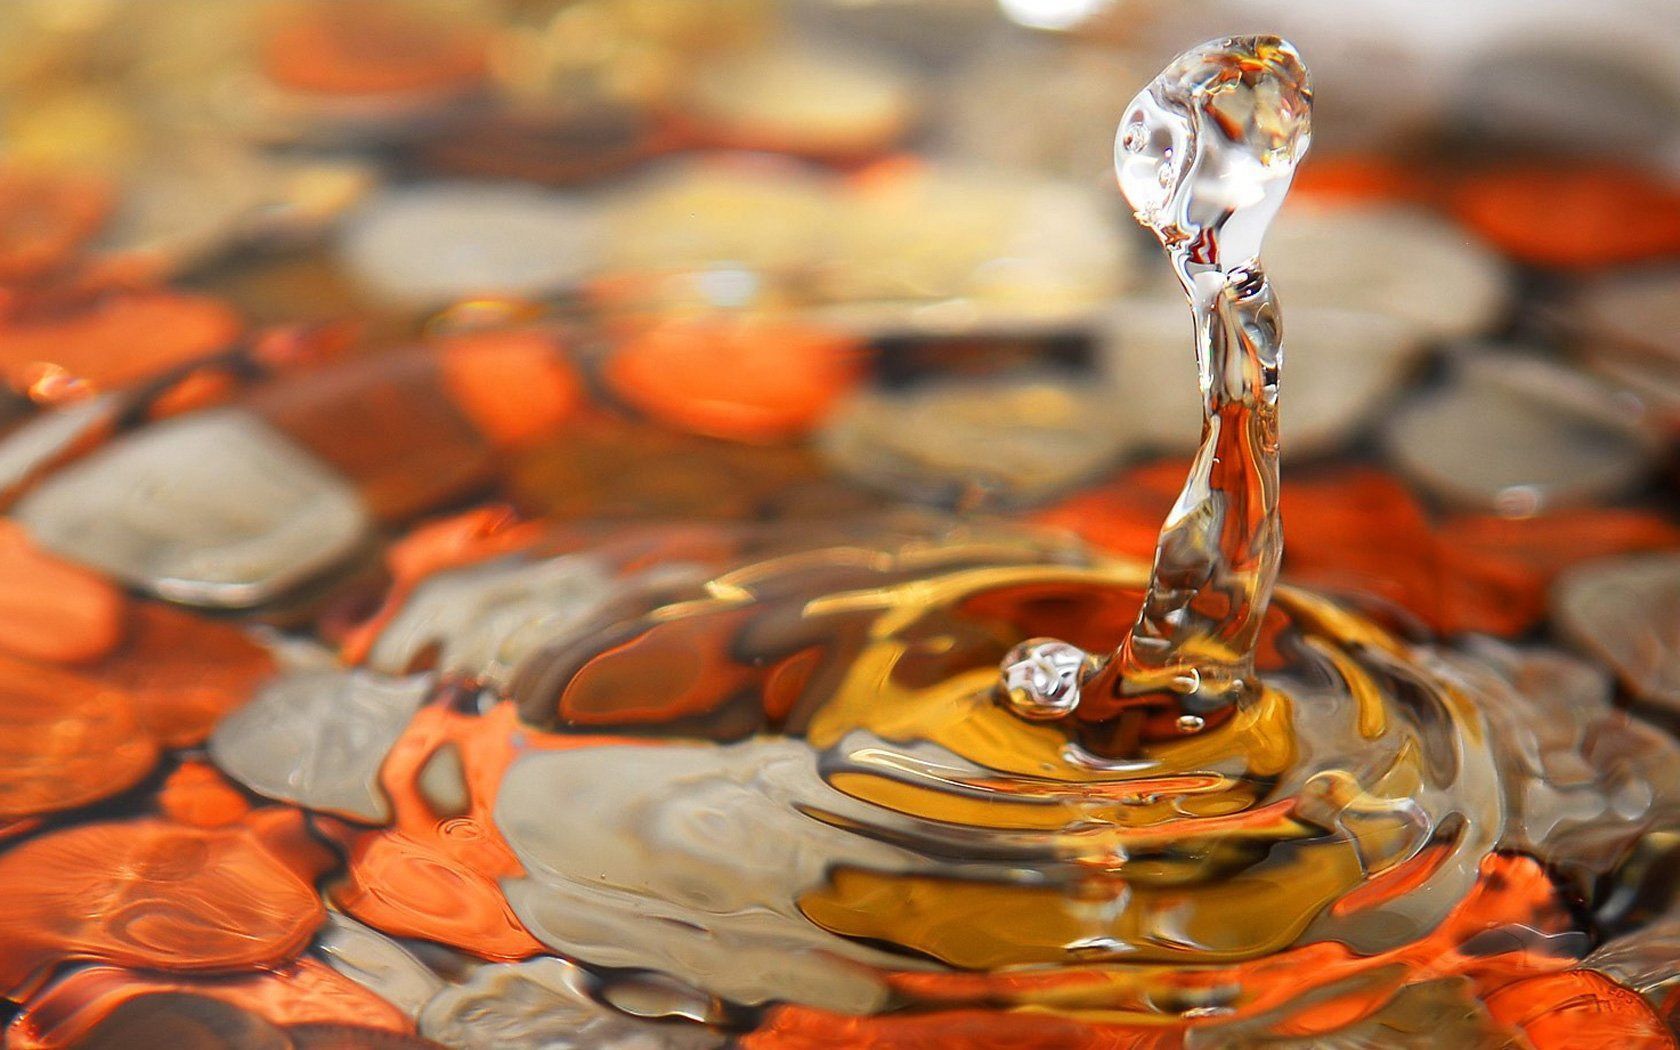 Water Drops HD Wallpaper | Water Drops Images | Cool Wallpapers